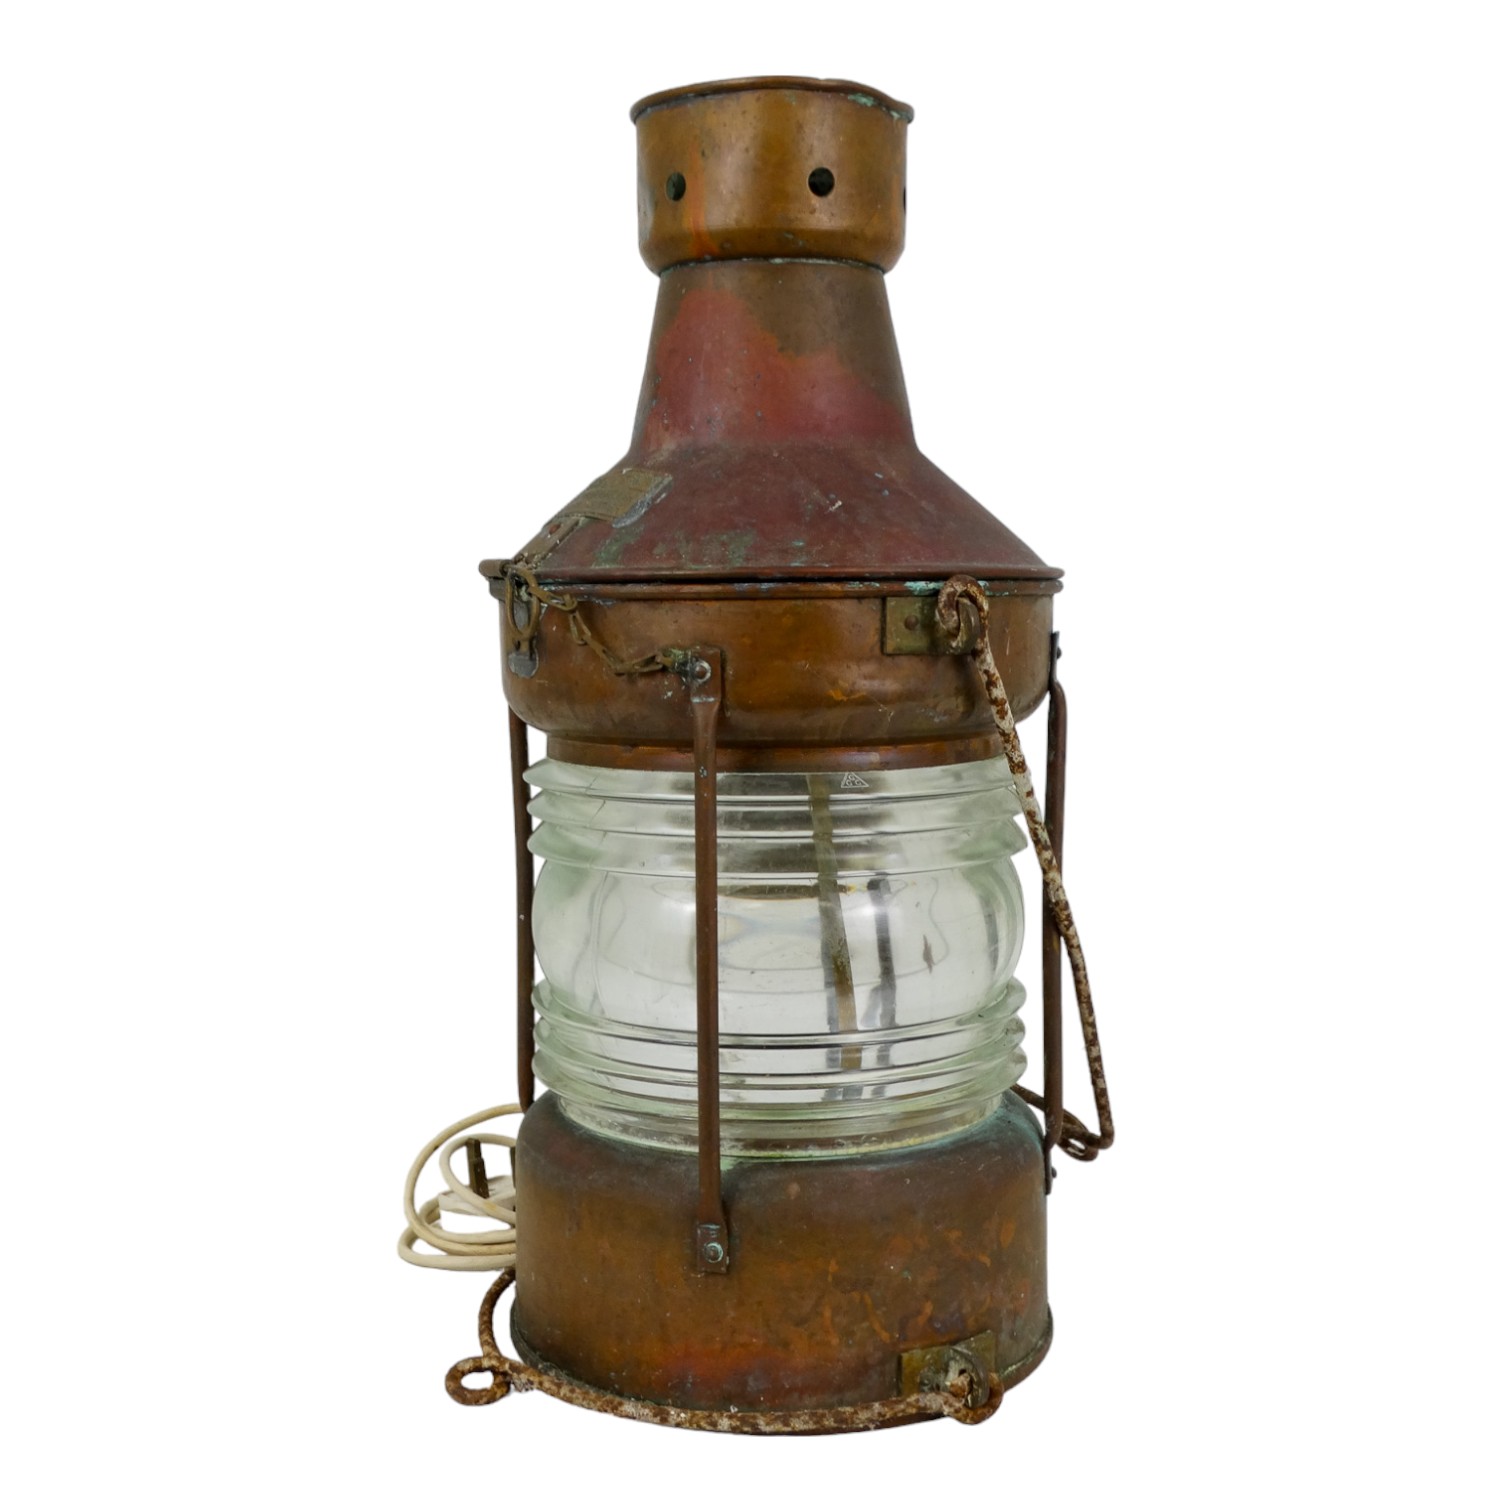 An early 20th century masthead light by H. Henriksen - copper with wrought steel handles, - Image 2 of 5